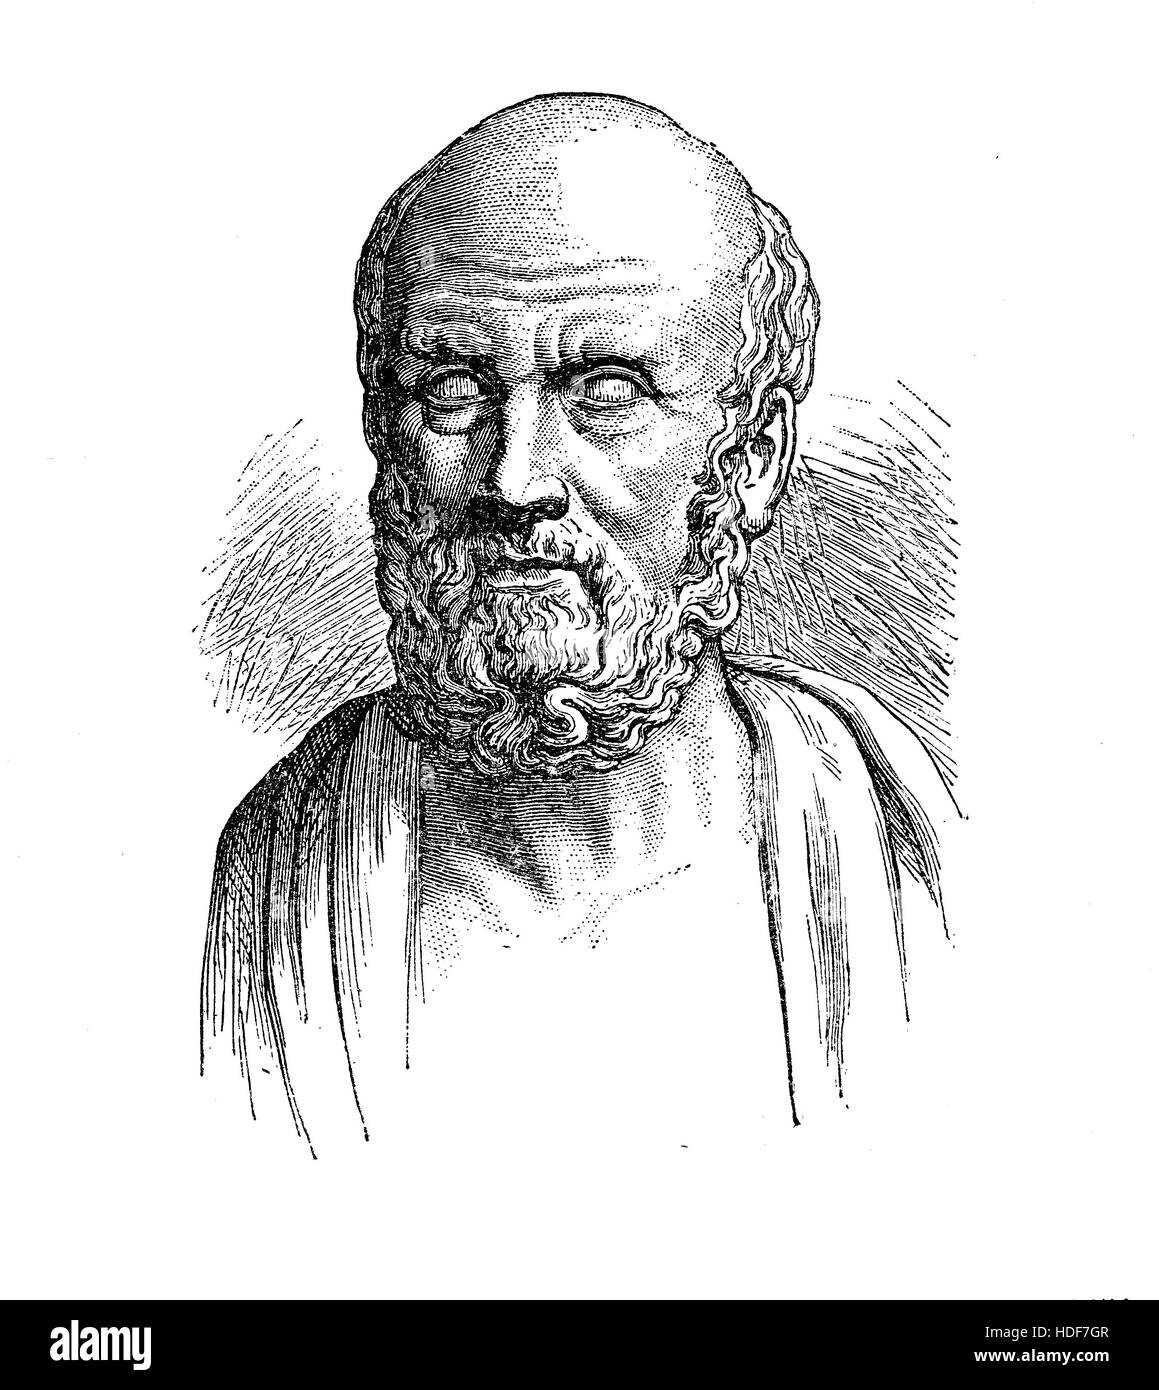 Hippocrates of Kos greek physician outstanding figure of the medicine history, founder of the Hippocratic School of Medicine, establishing thus medicine as a profession. Stock Photo